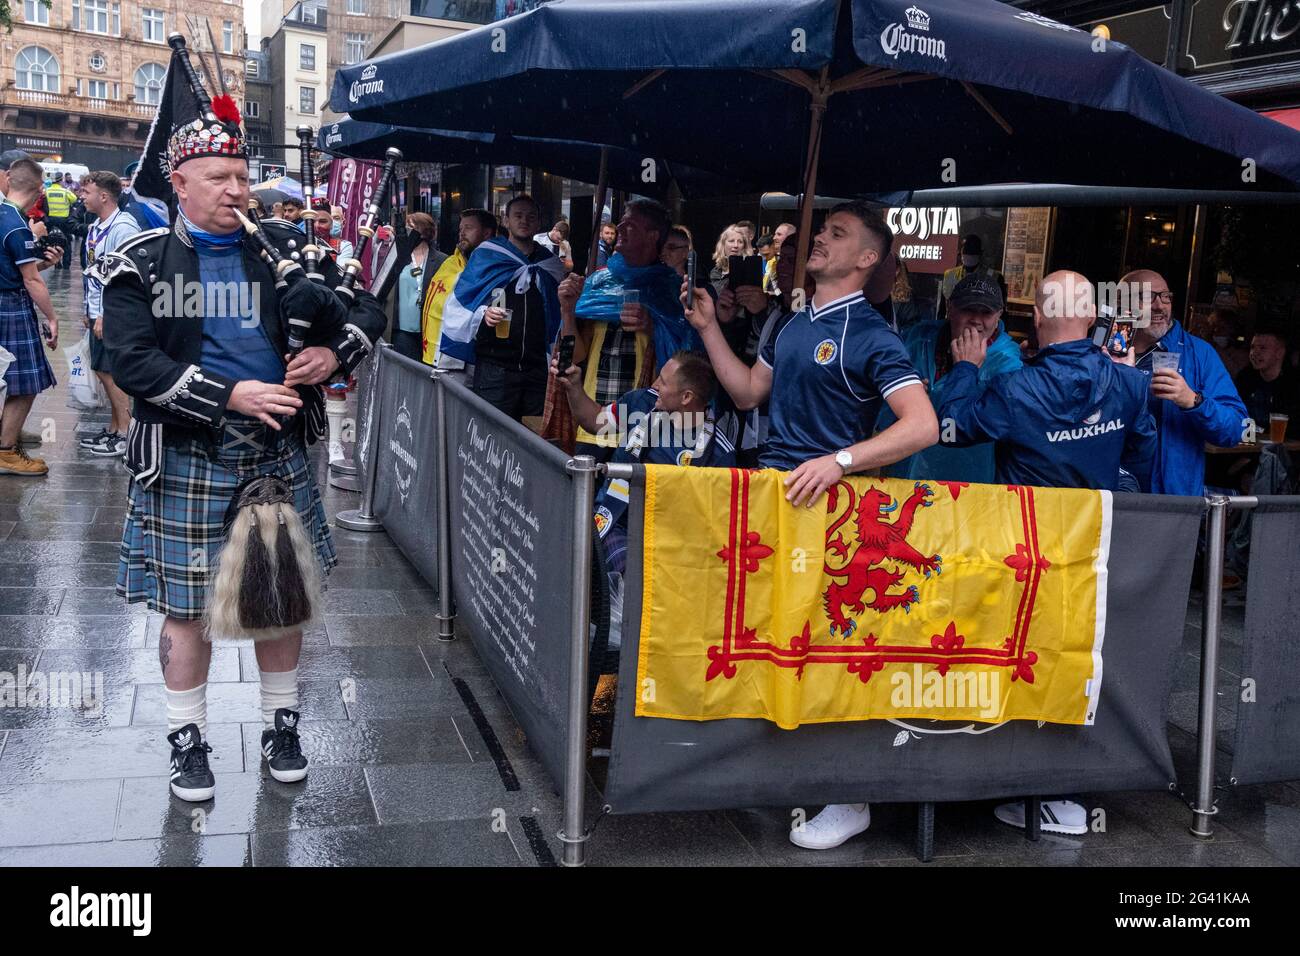 Scotland football supporters gather in the rain near London's Leicester Square before tonight's match between England and Scotland at Wembley, during the European Championships (postponed for a year because of the Covid pandemic), on 18th June 2021, in London, England. The two nations have traditionally been fierce sporting rivals and this is the first time that Scotland has qualified for the 'Euros' for 23 years. Stock Photo